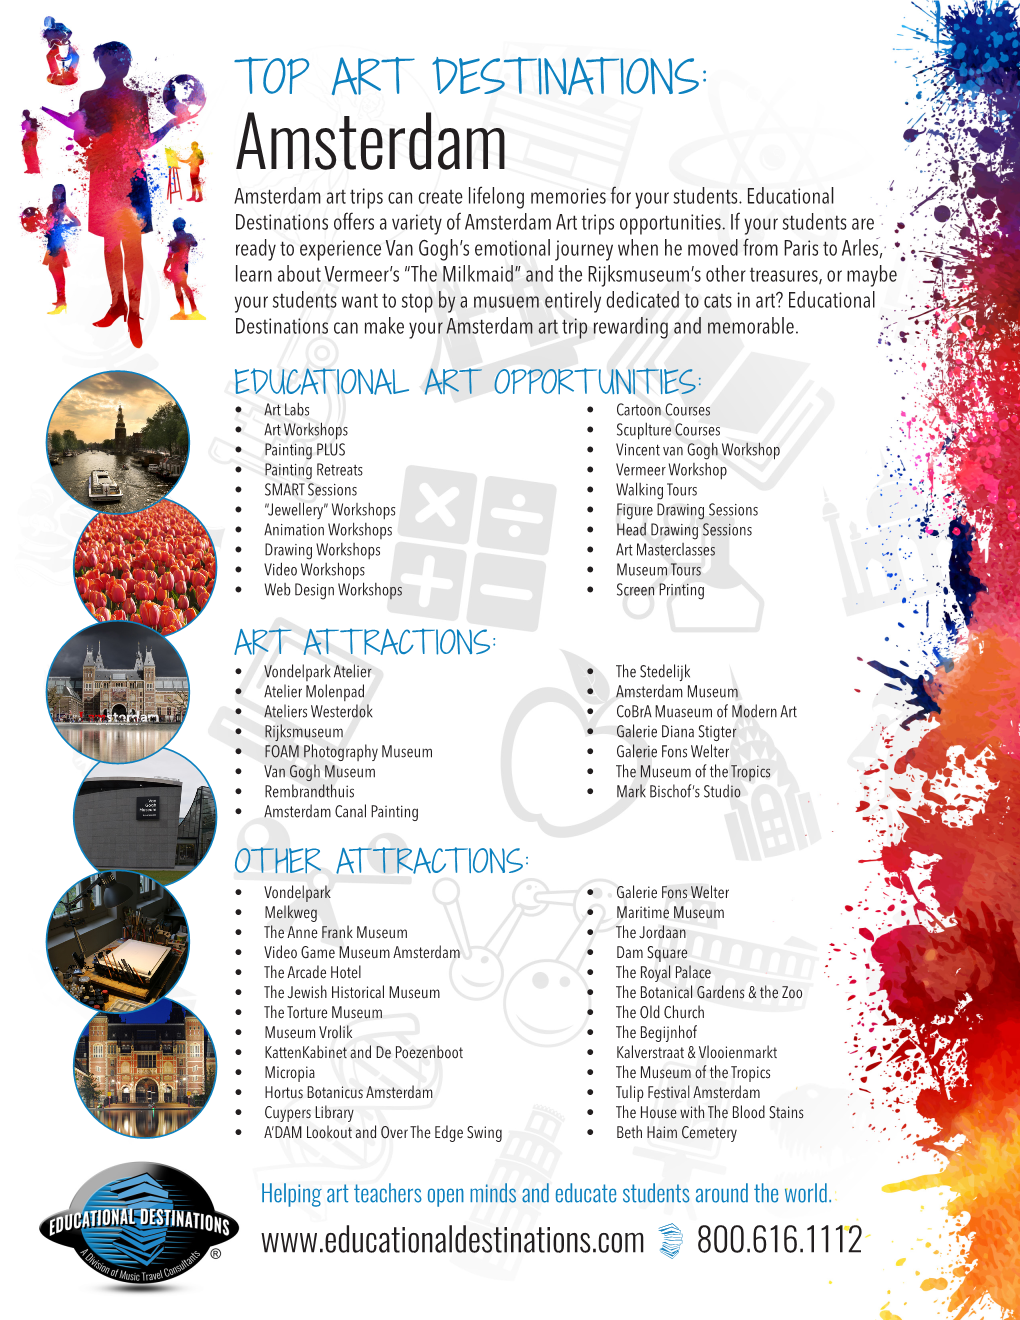 Amsterdam Amsterdam Art Trips Can Create Lifelong Memories for Your Students